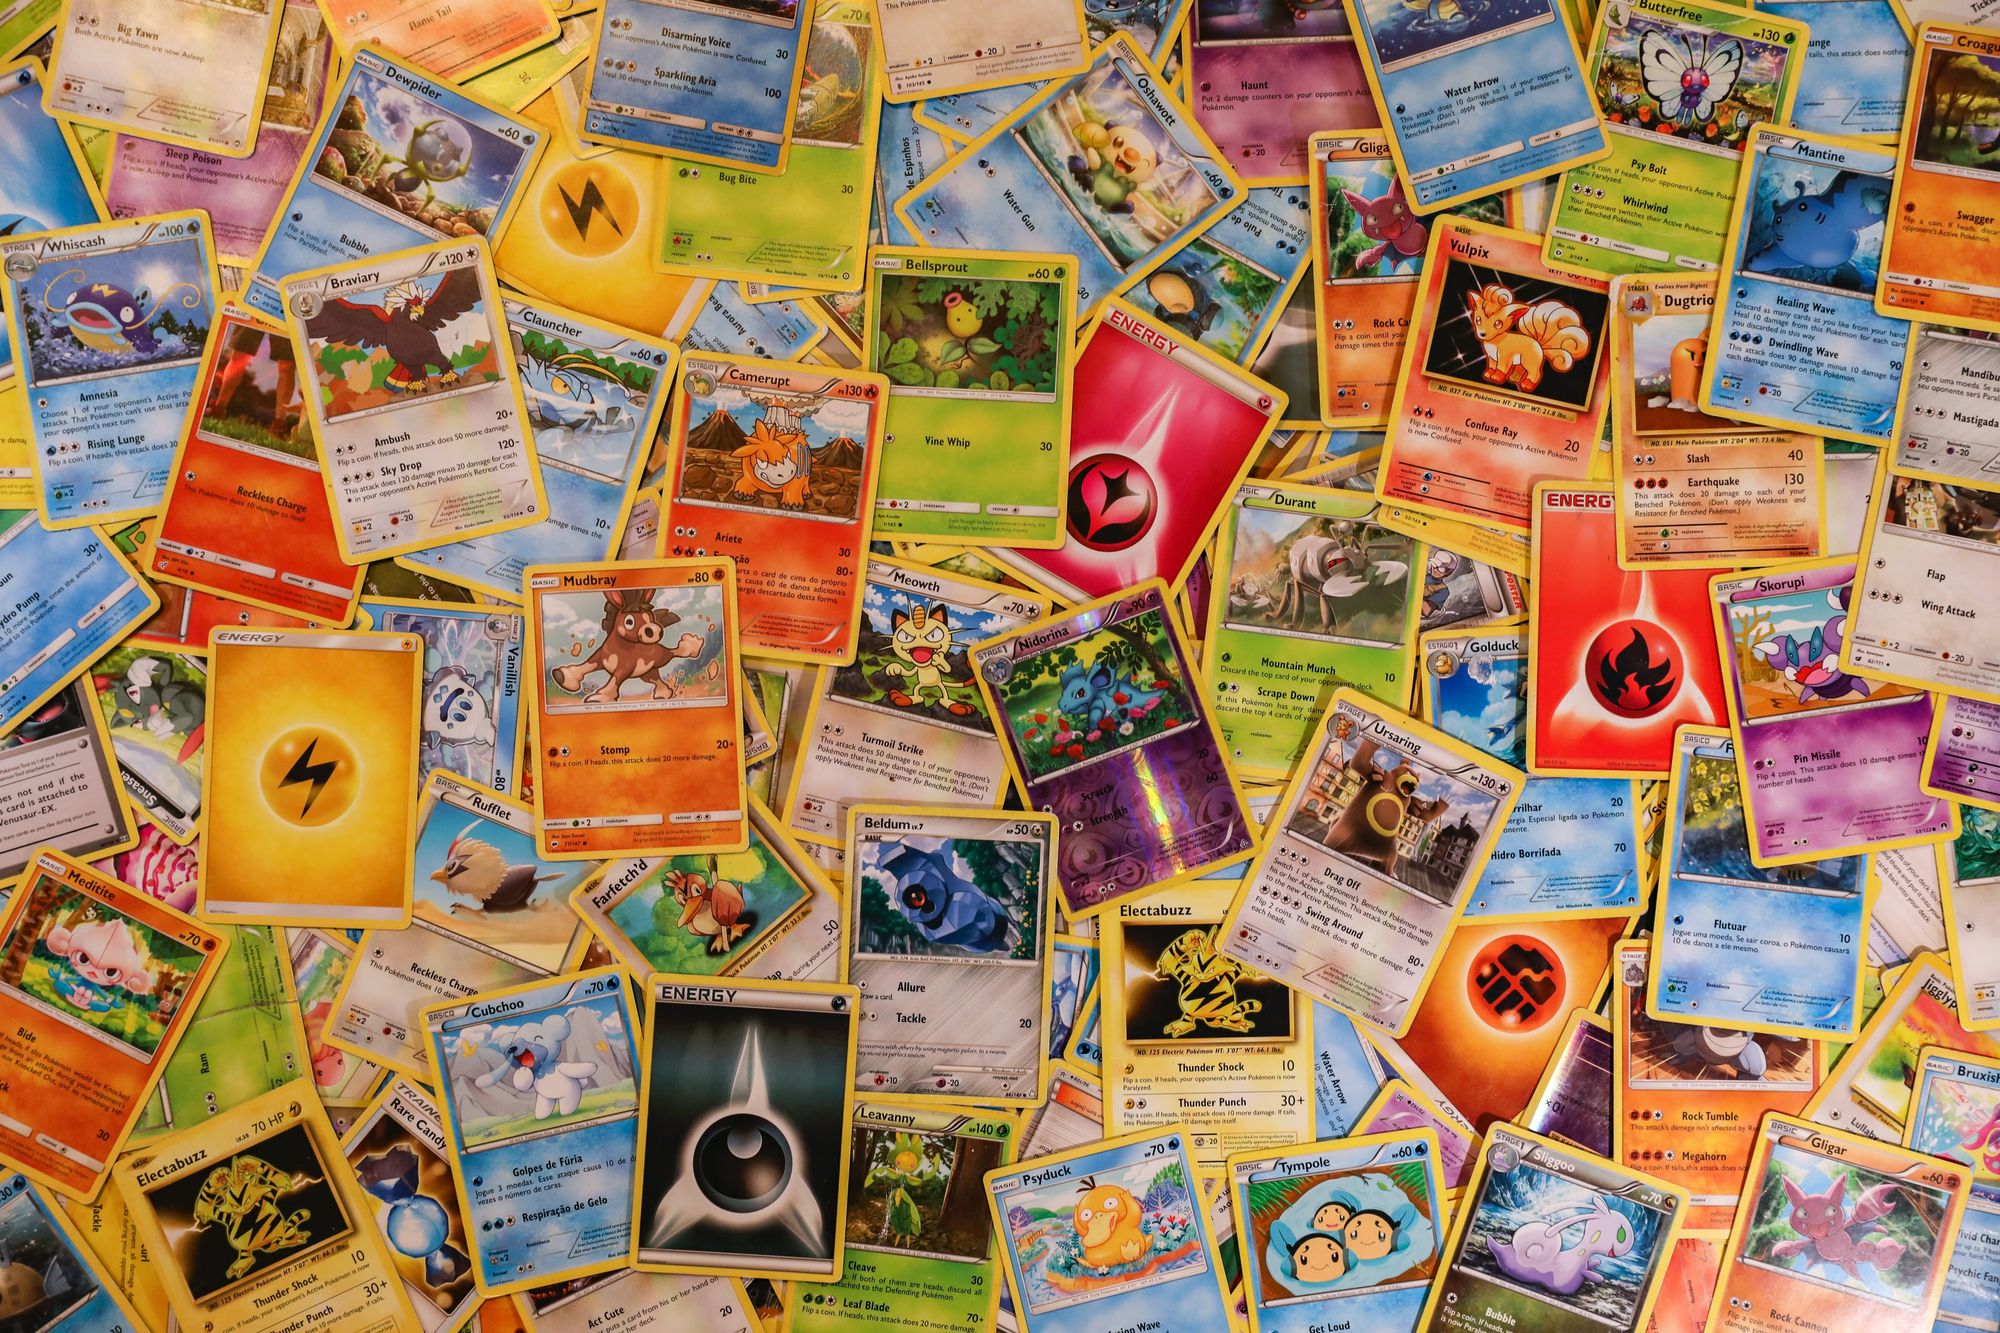 Collection of colorful trading cards scattered across the surface